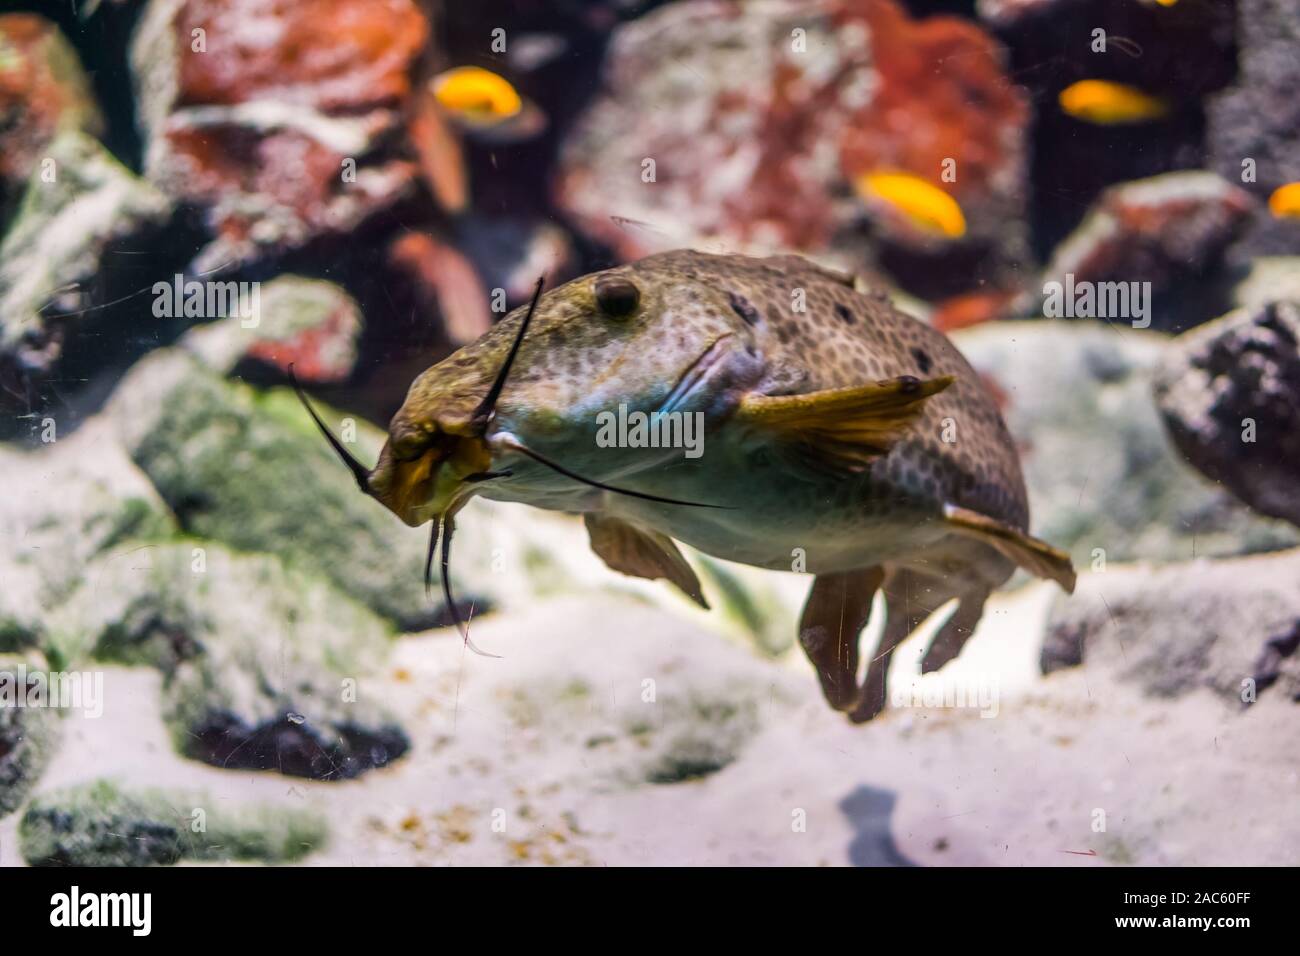 giraffe catfish with its face in closeup, tropical fresh water fish specie from Africa Stock Photo